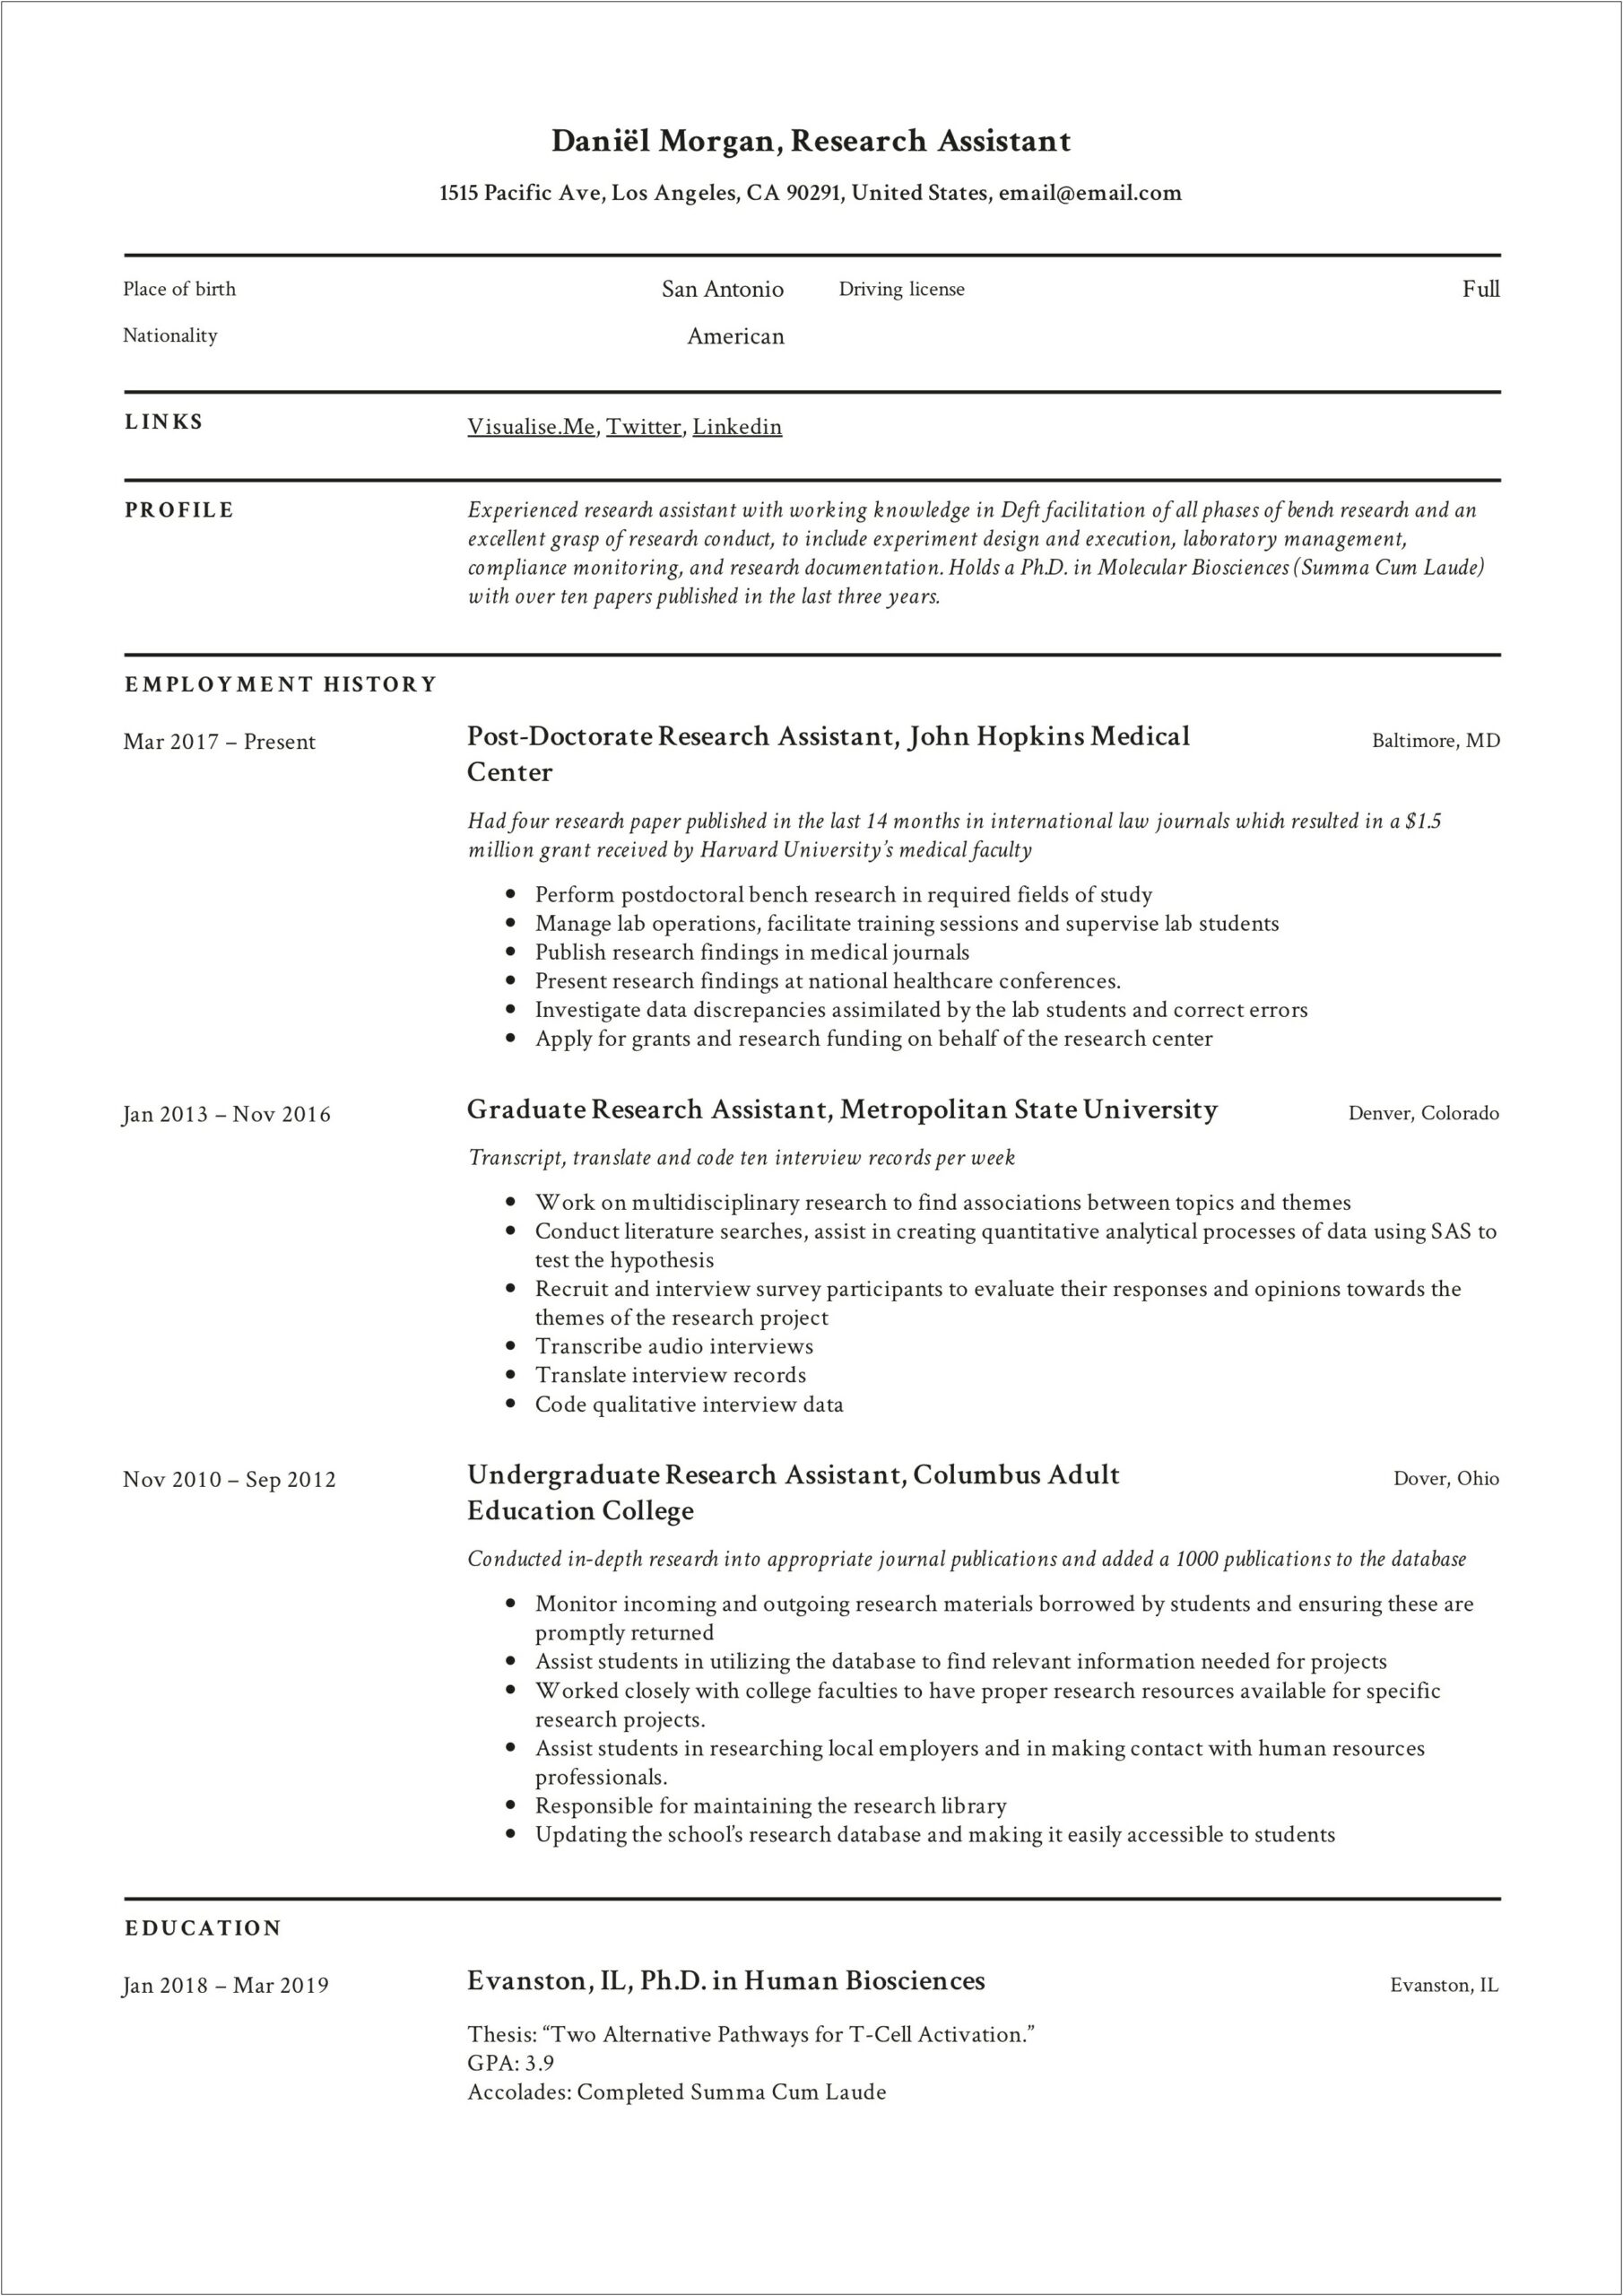 Resume Skills For Research Assistant